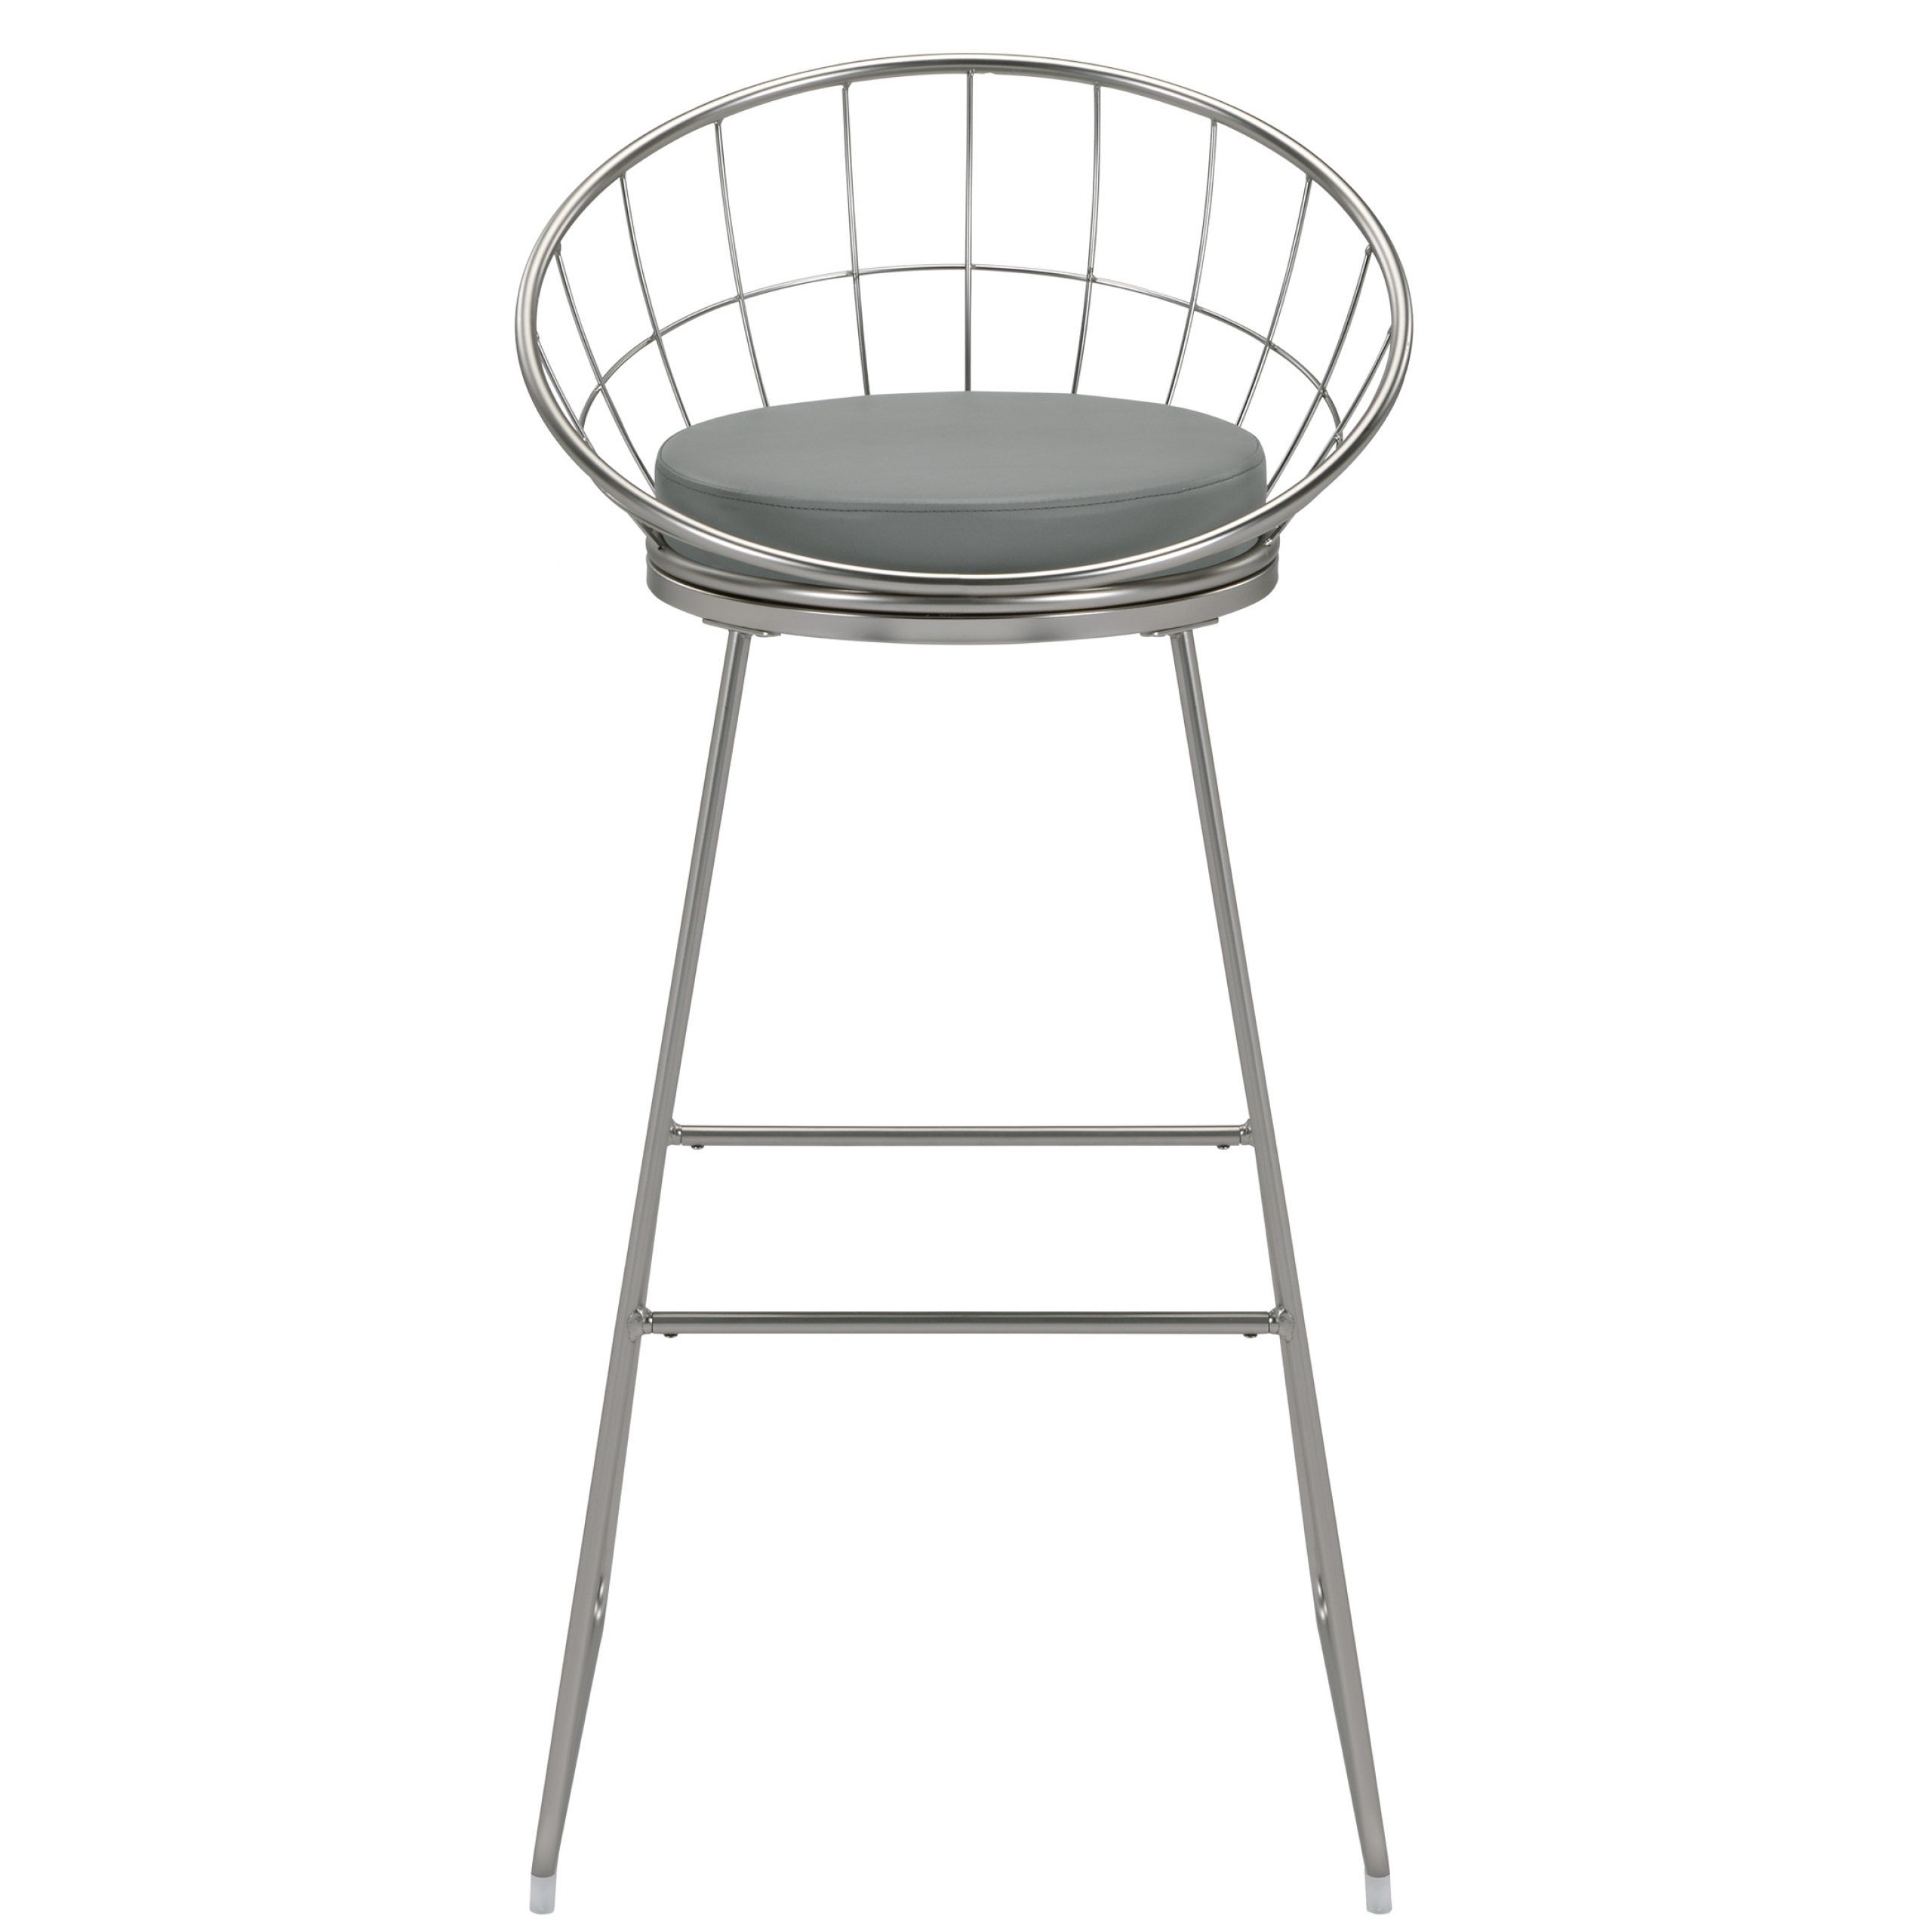 Padded Seat Bar Stools Grey And Satin Nickel (set Of 2) – Co Intended For Gray Nickel Stools (View 7 of 20)